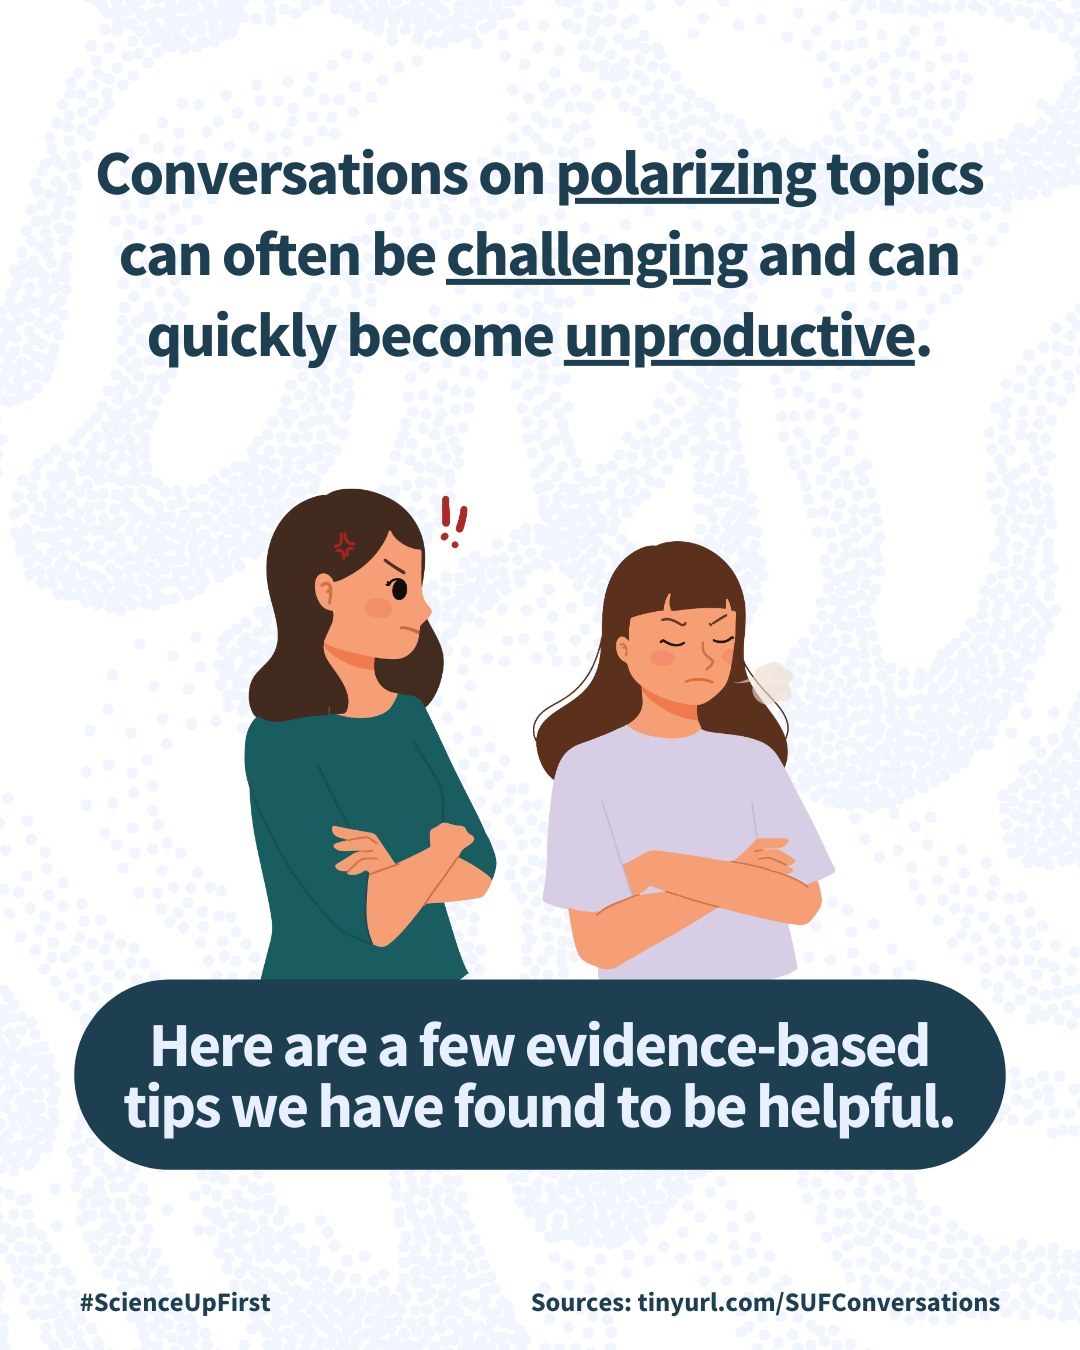 Our tips for conversations on polarizing topics